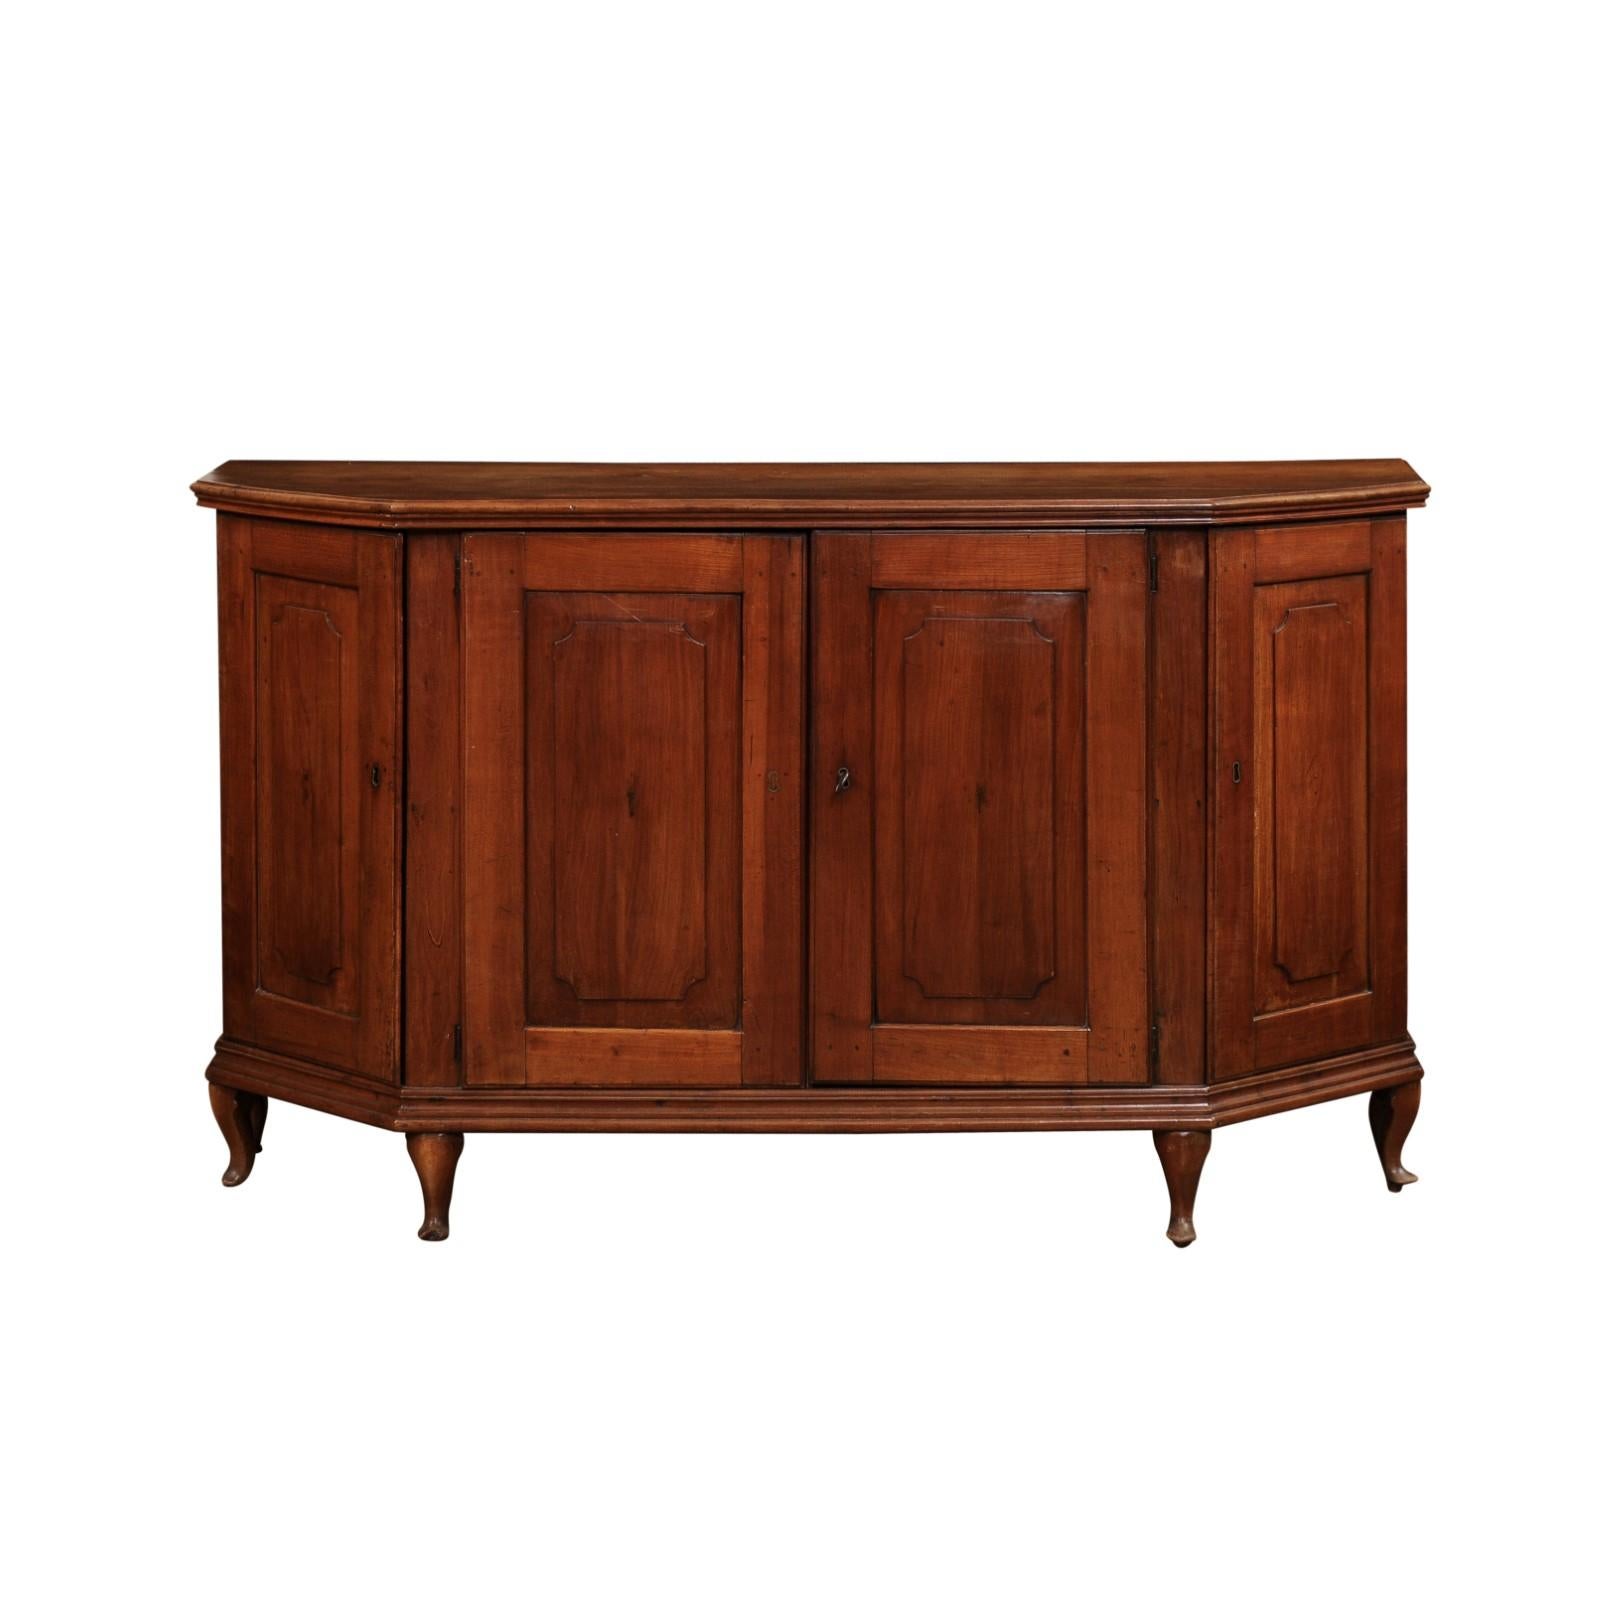 Italian Late 18th Century Cherry Sideboard with Four Doors and Canted Sides 10